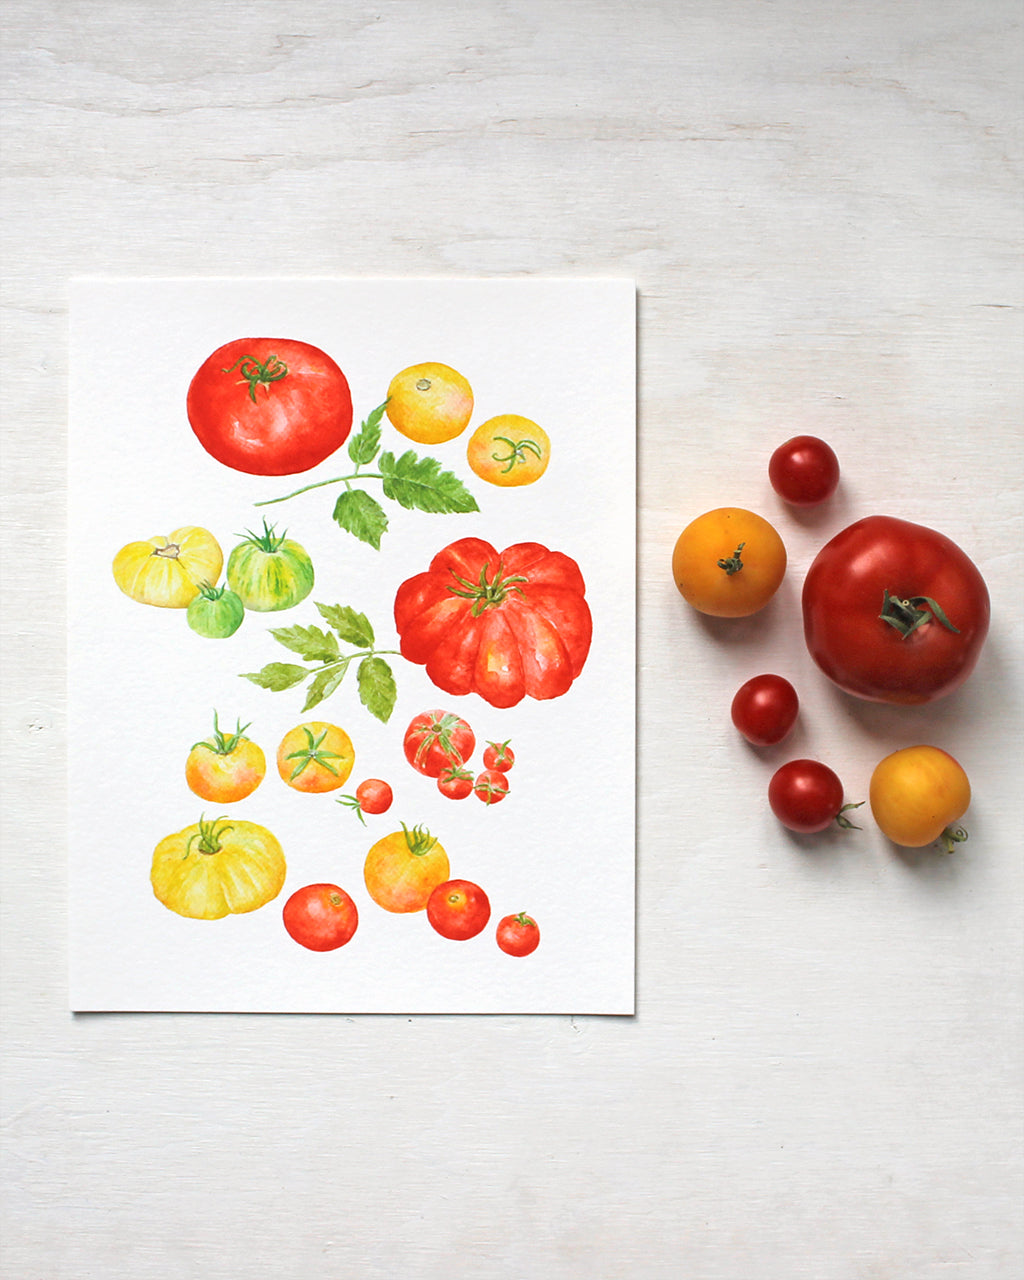 An art print of red, yellow and green heirloom tomatoes from the garden. Watercolor artist Kathleen Maunder.